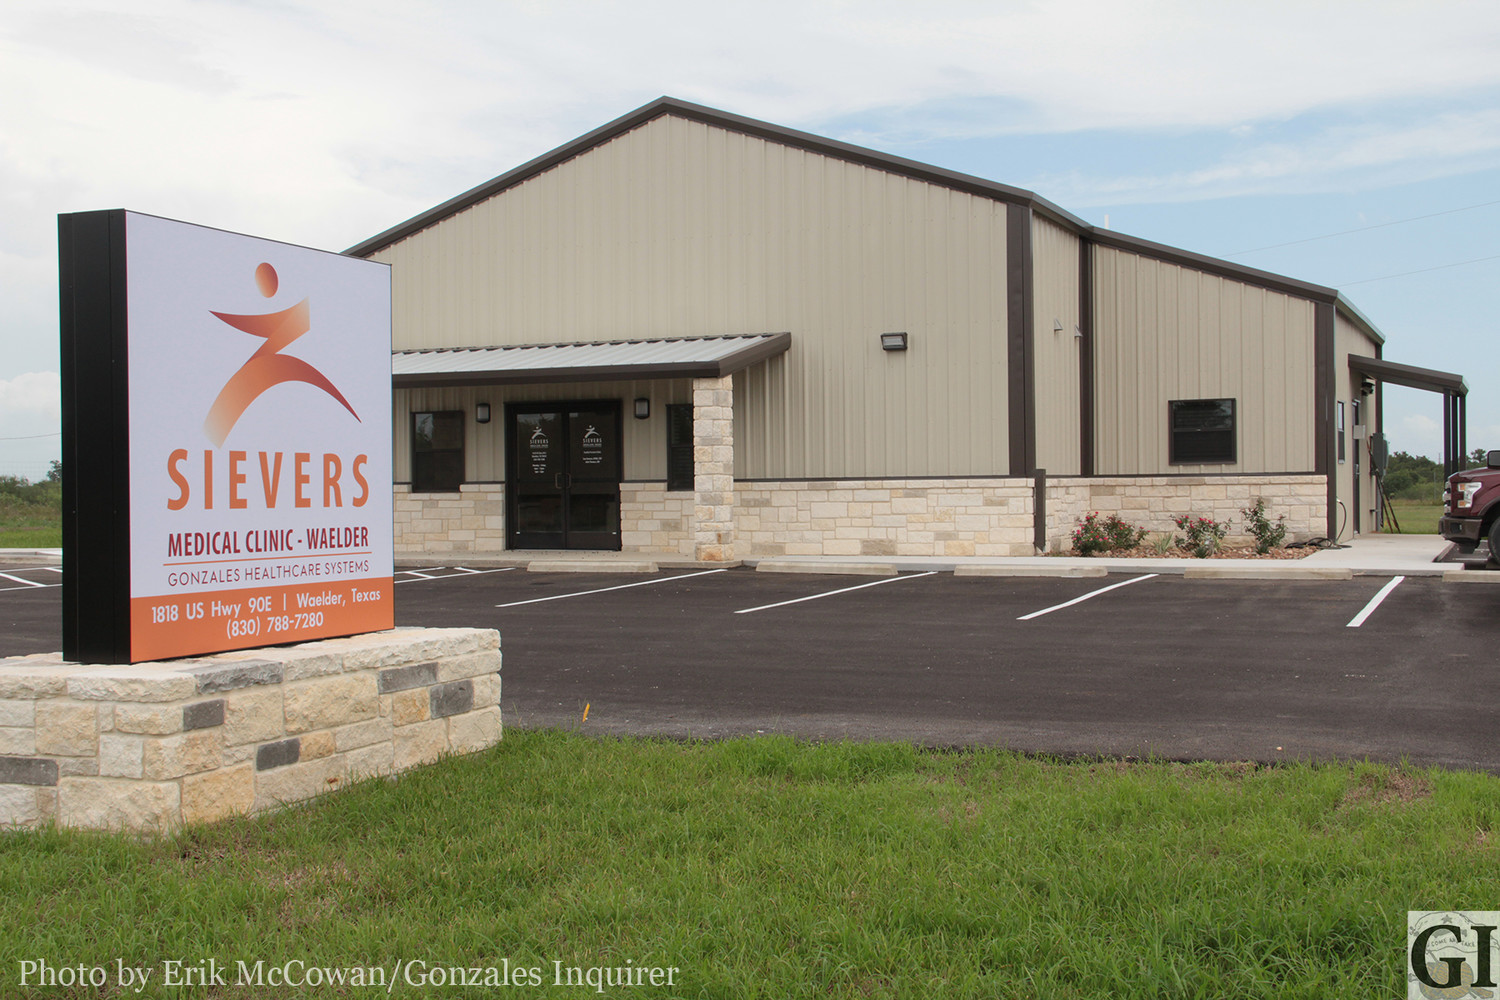 The new Waelder branch of the Sievers Medical Clinic is open for business. They perform a host of services, like well woman exams, well child visits, immunizations, prescription refills, preventative care, school physicals, and general sick care from infants to elderly.